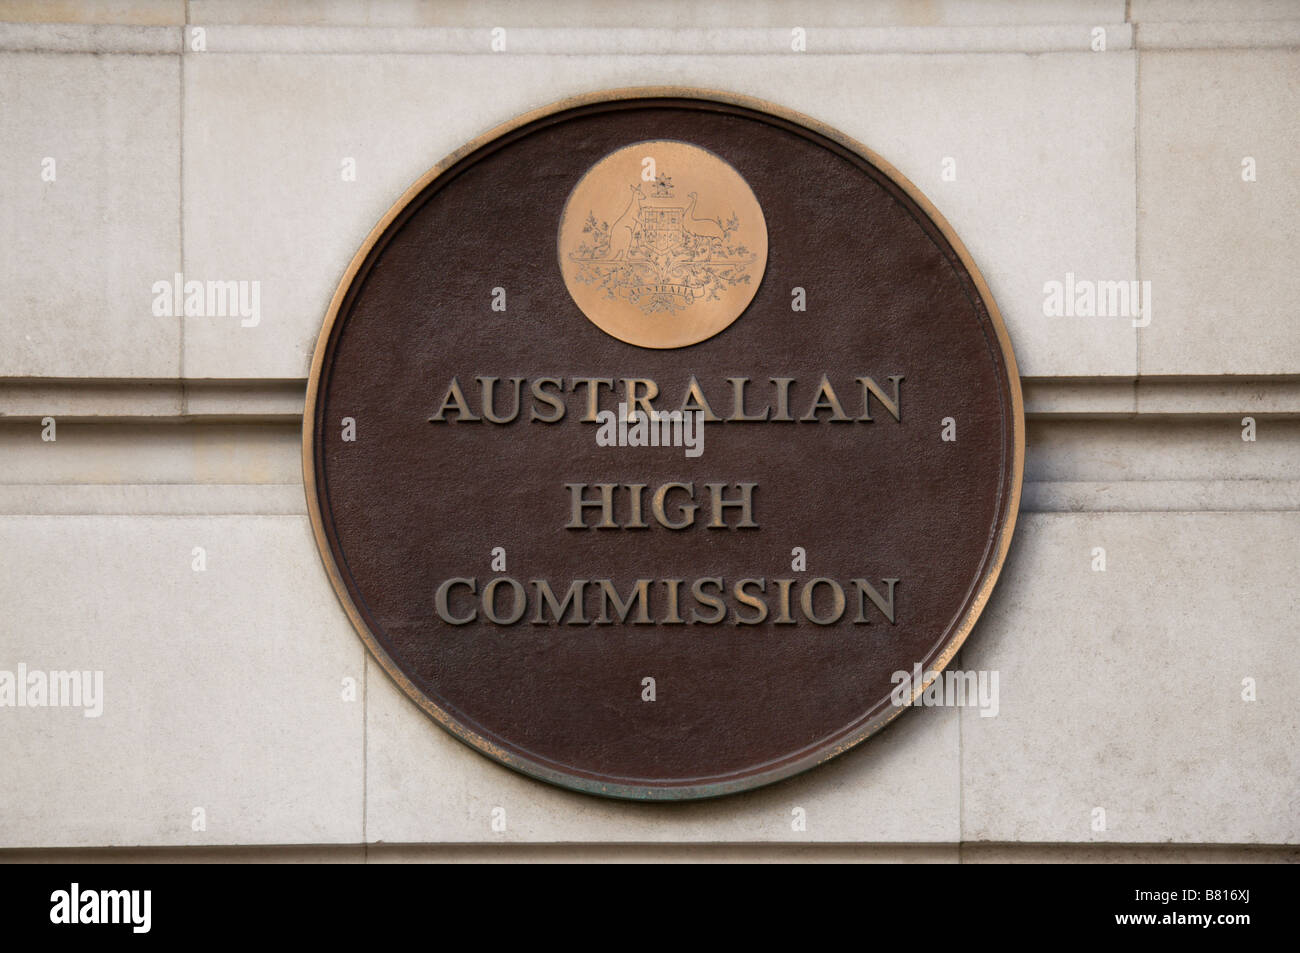 The plaque outside the main entrance to the Australian High Commission, Australia House, in the Strand, London. Jan 2009. Stock Photo